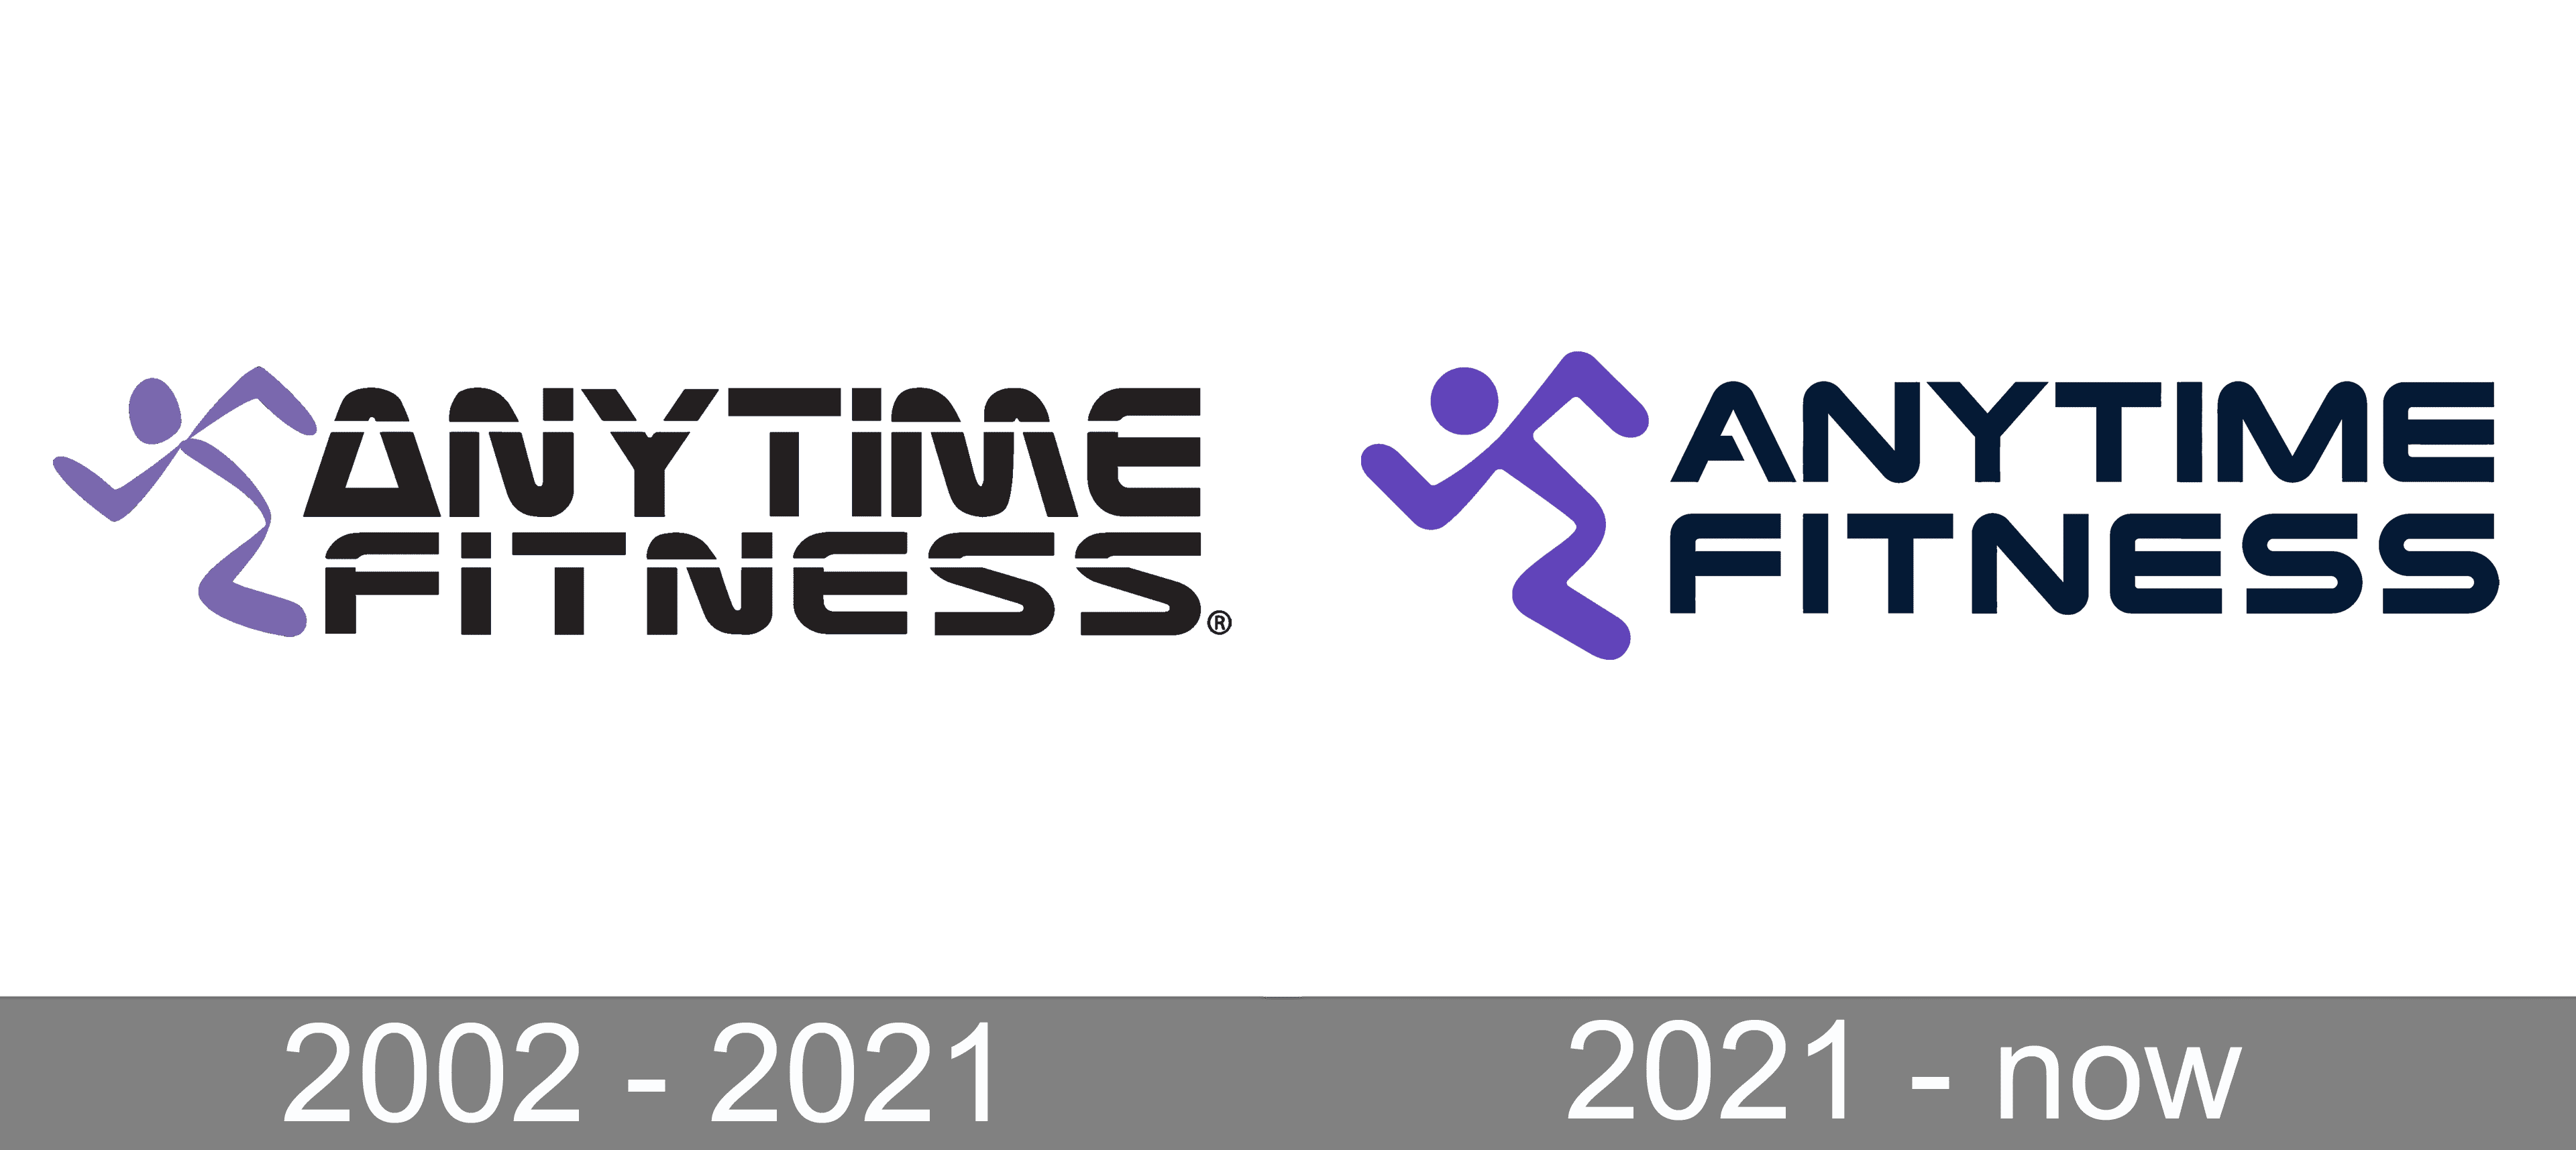 https://1000logos.net/wp-content/uploads/2022/09/Anytime-Fitness-Logo-history.png